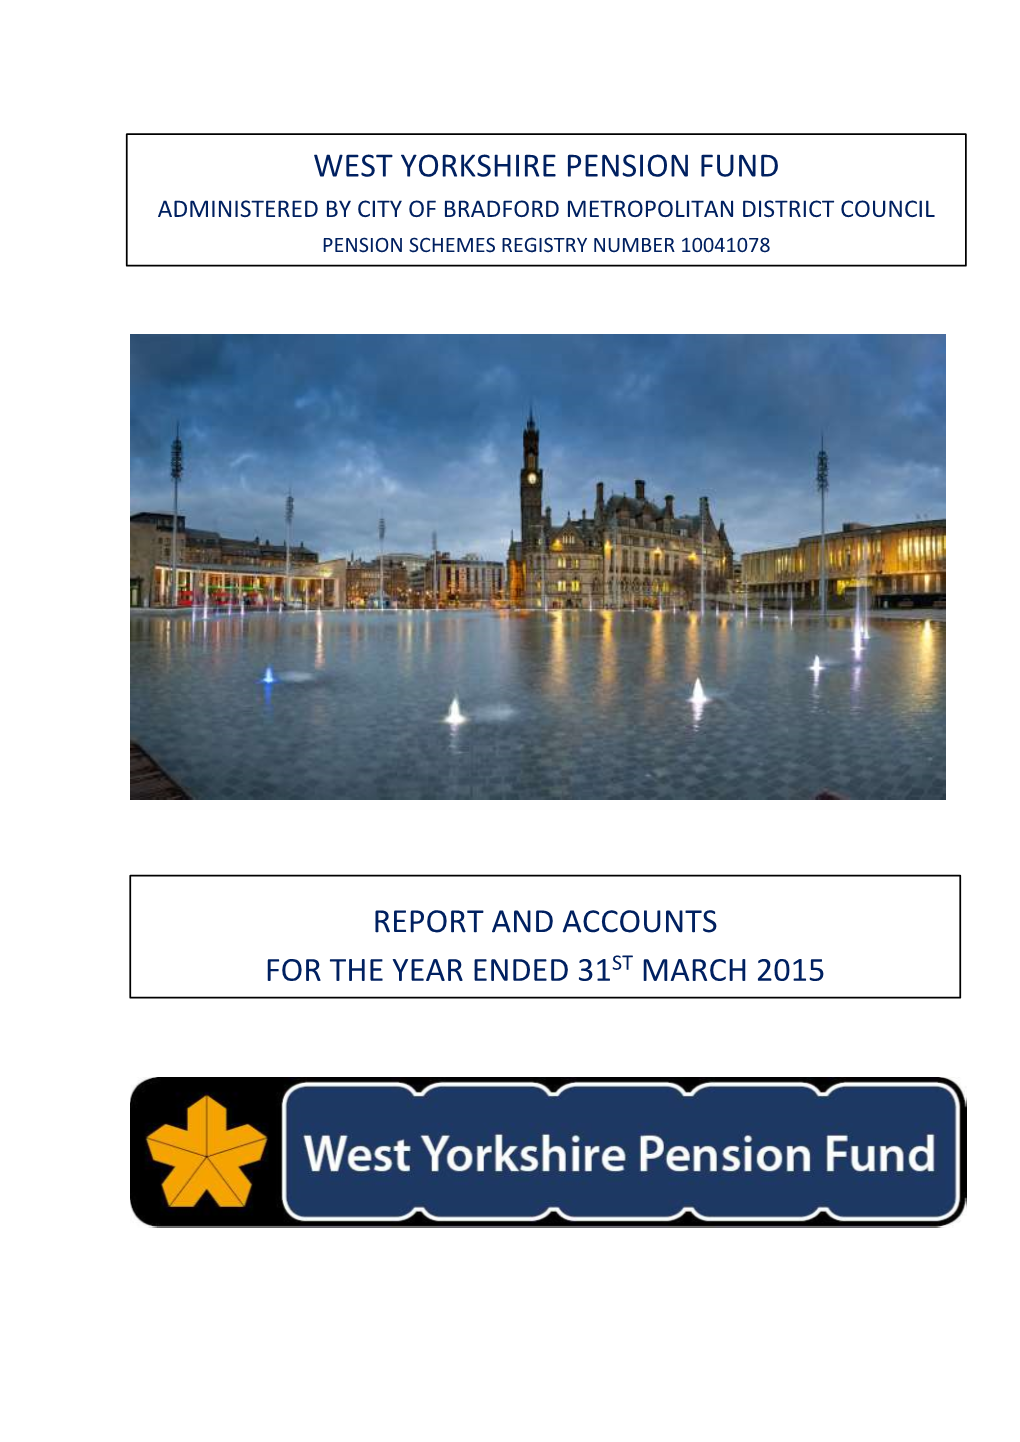 Overview and Legal Status of West Yorkshire Pension Fund